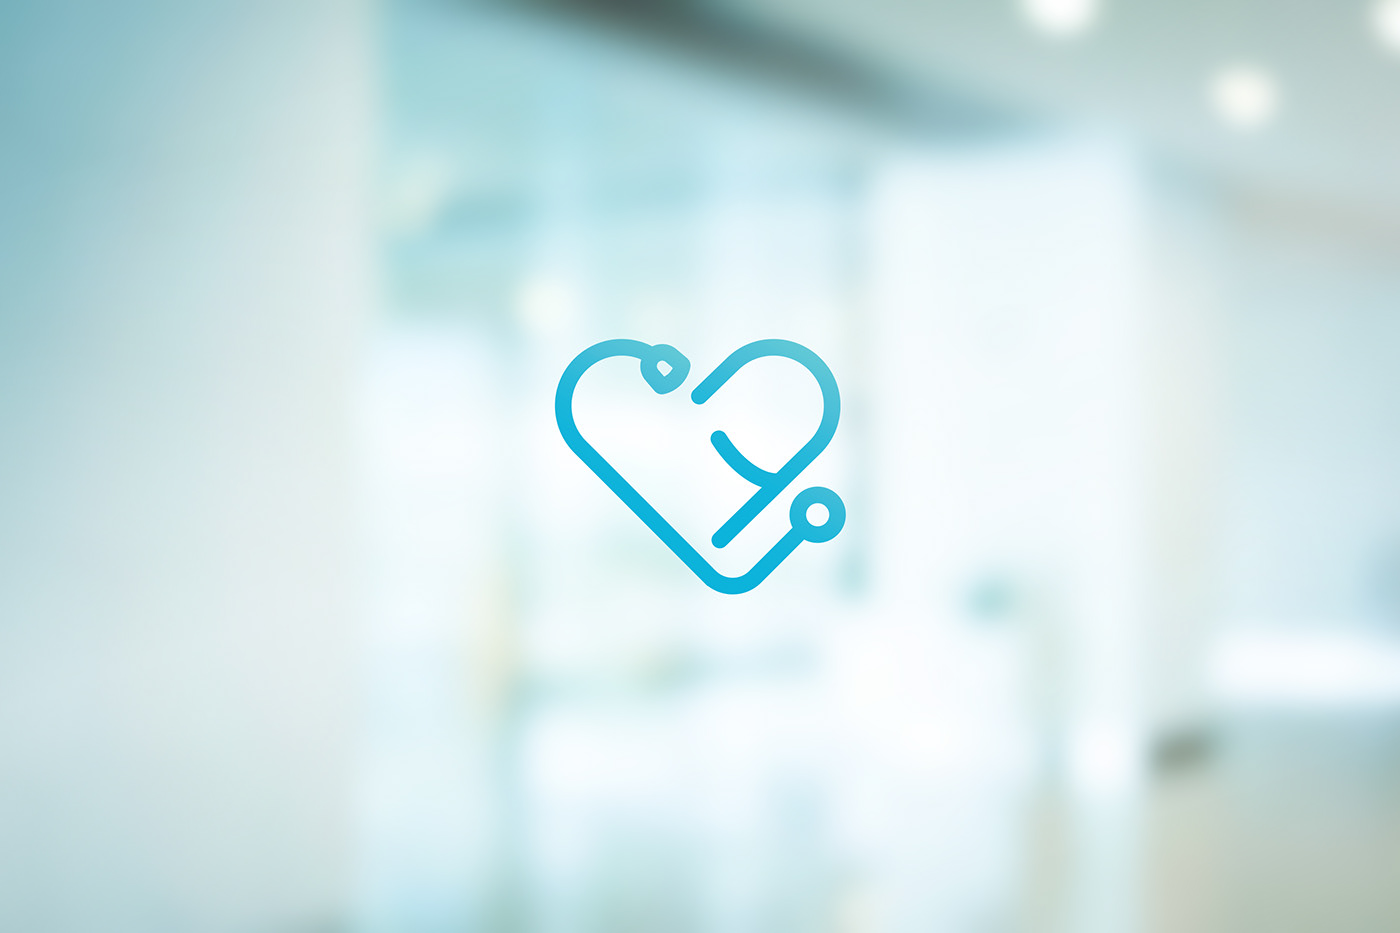 Main brand mark for the healthcare logo. It shows a heart, pill and stethoscope imagery.